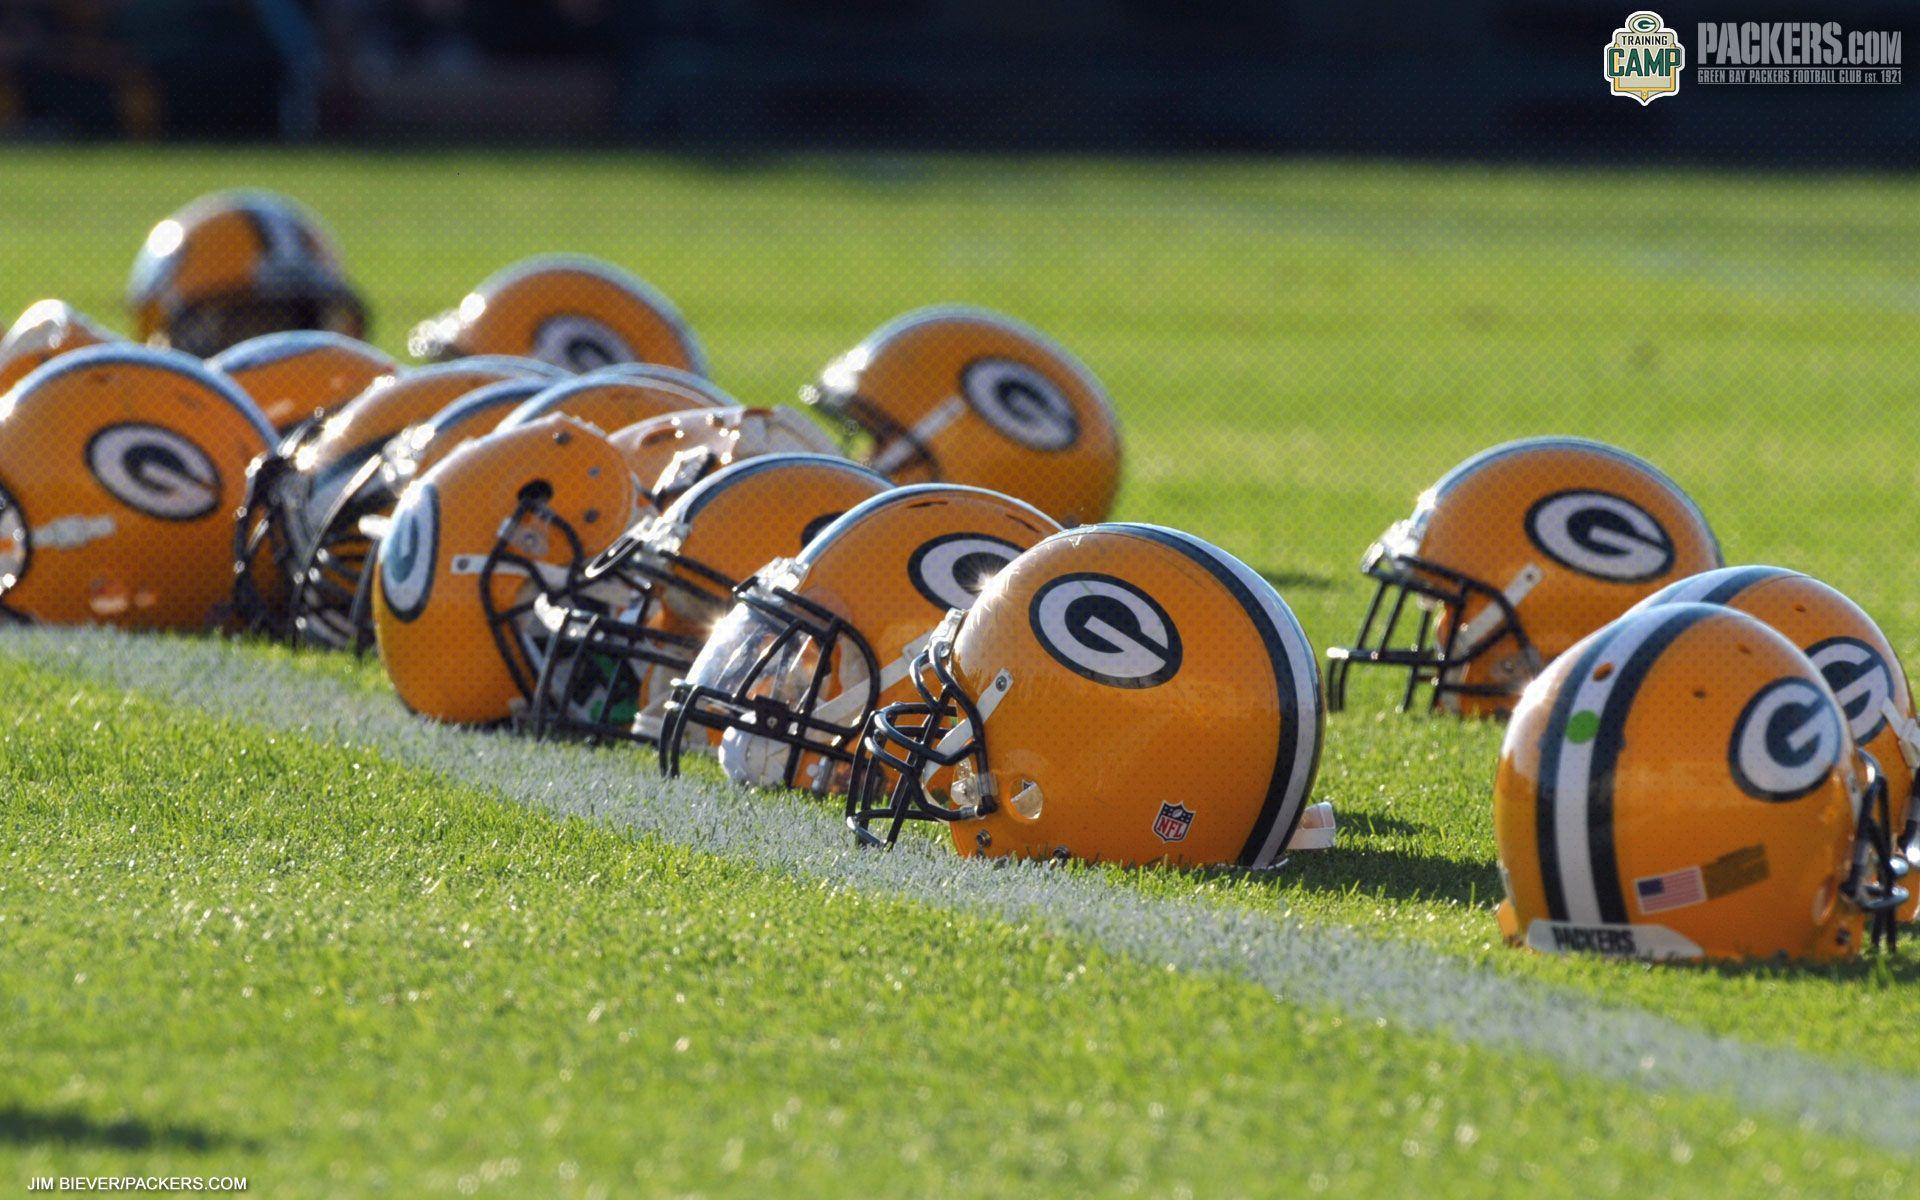 18 Green Bay Packers HD Wallpapers